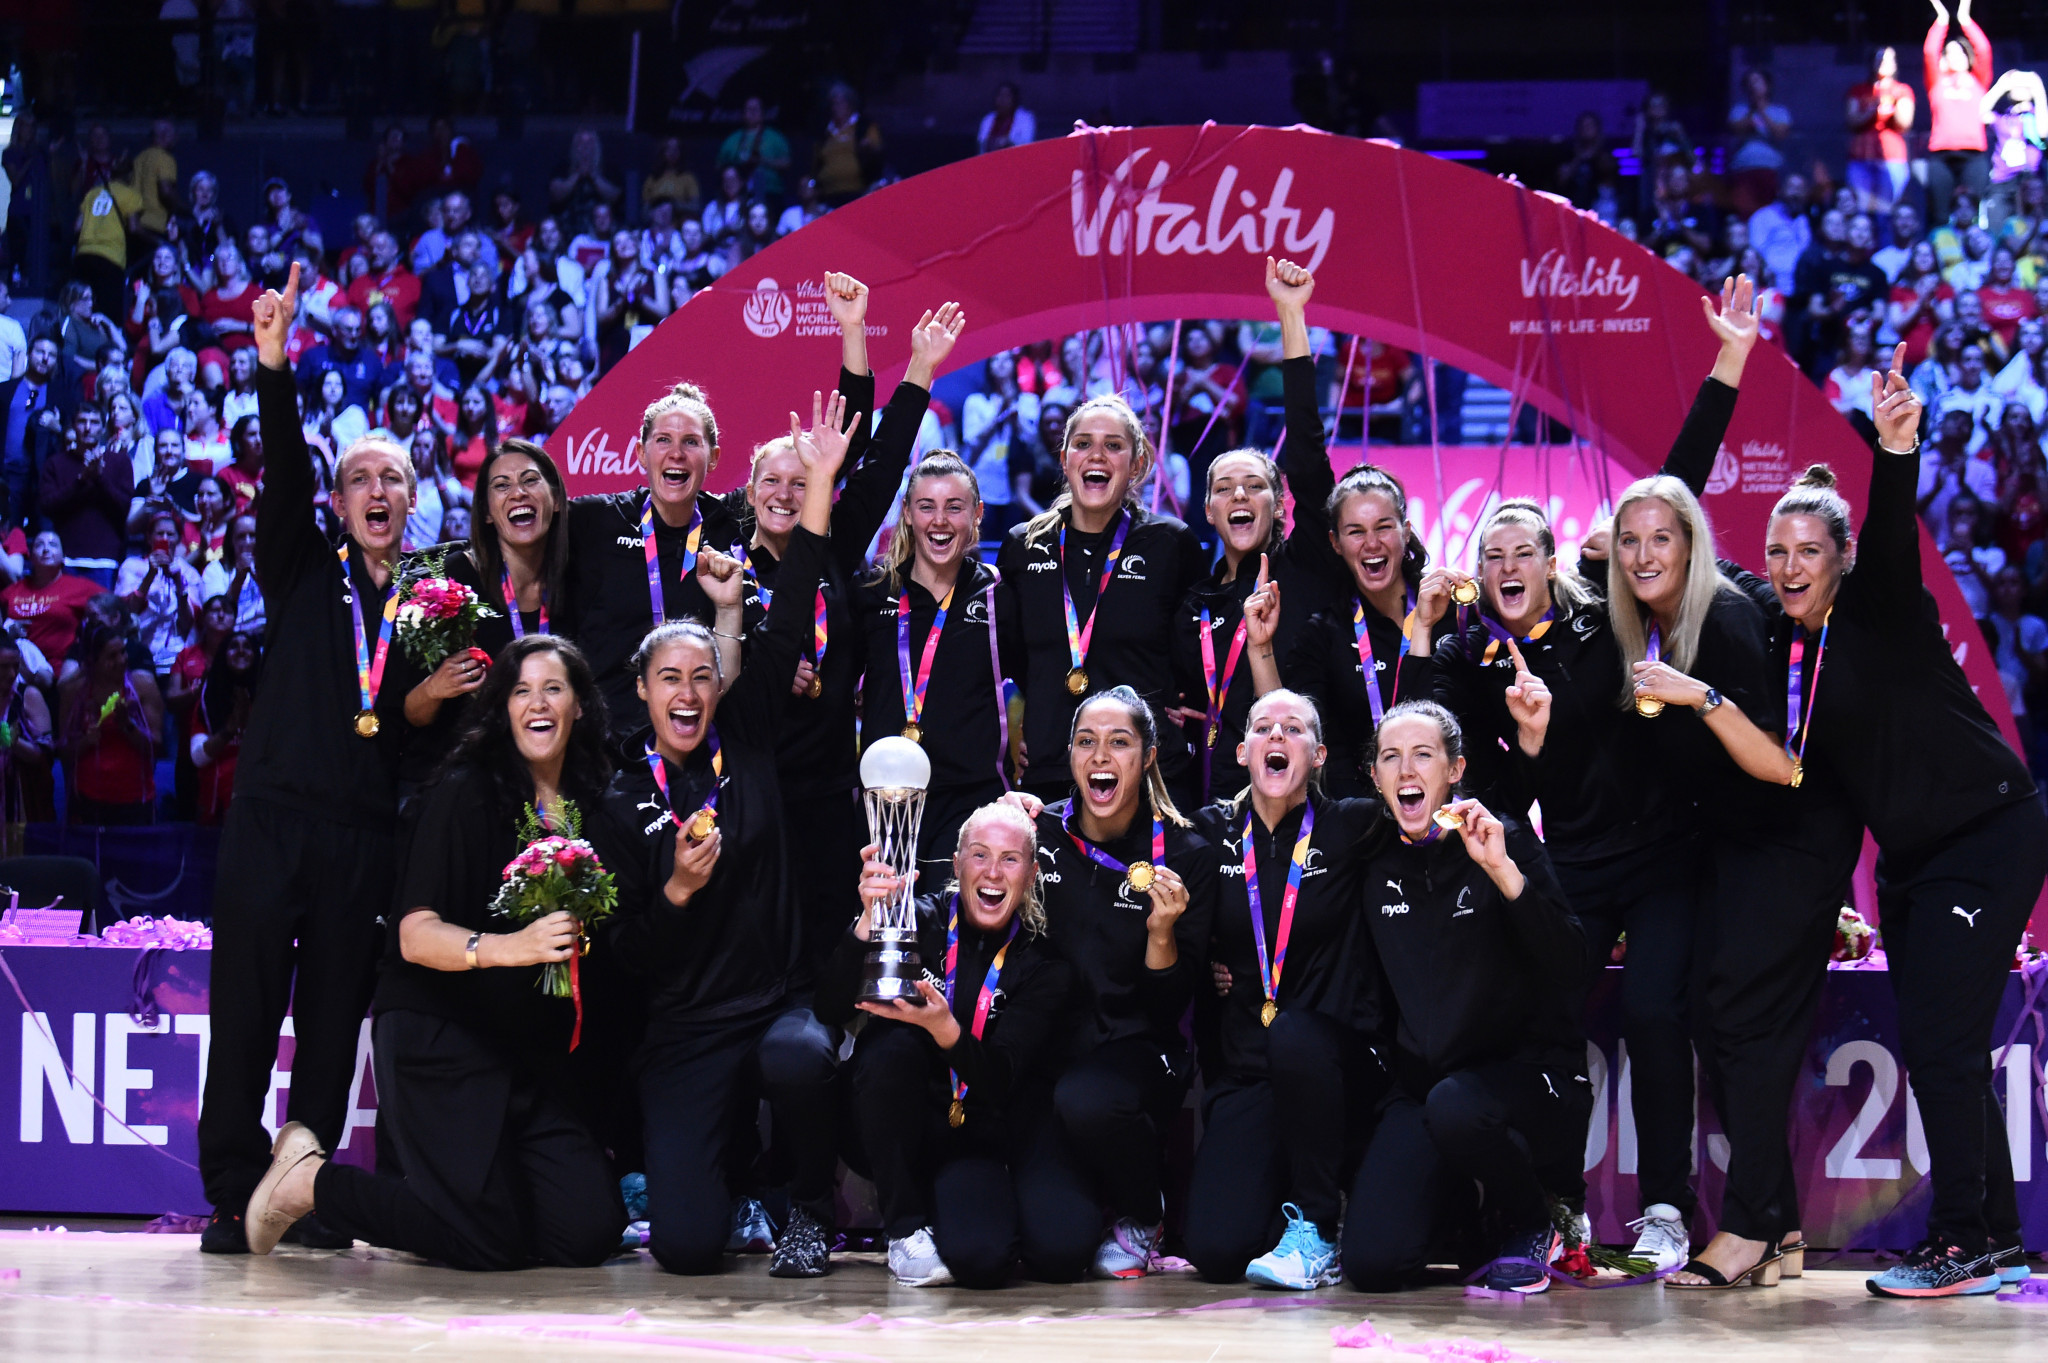 New Zealand defeated Australia in the 2019 Netball World Cup final ©Getty Images